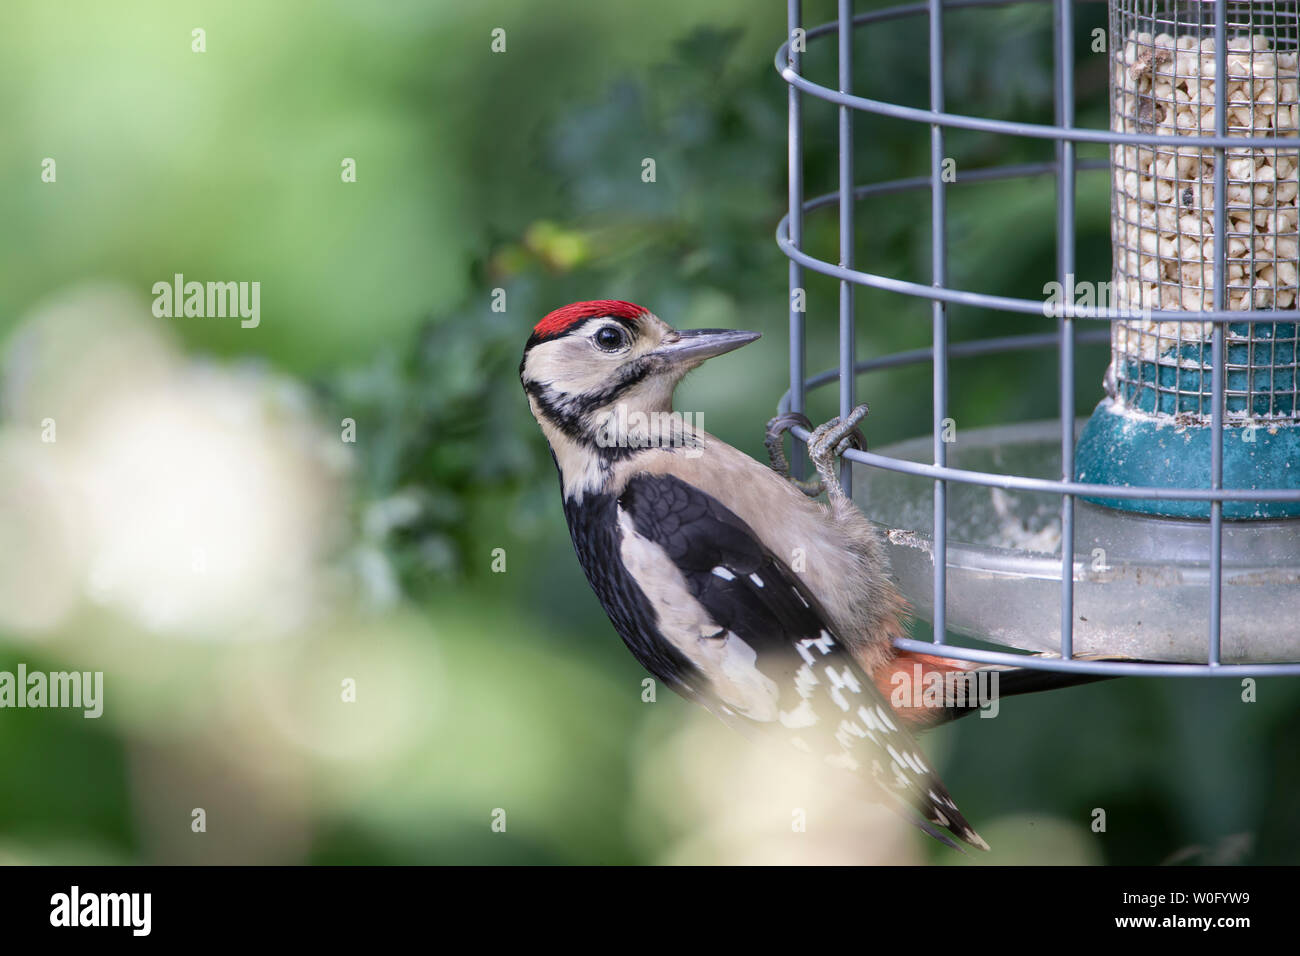 Juvenile Great Spotted woodpecker Dendrocopos Major with tell-tale red crown clinging to a cage protecting a bird feeder Stock Photo